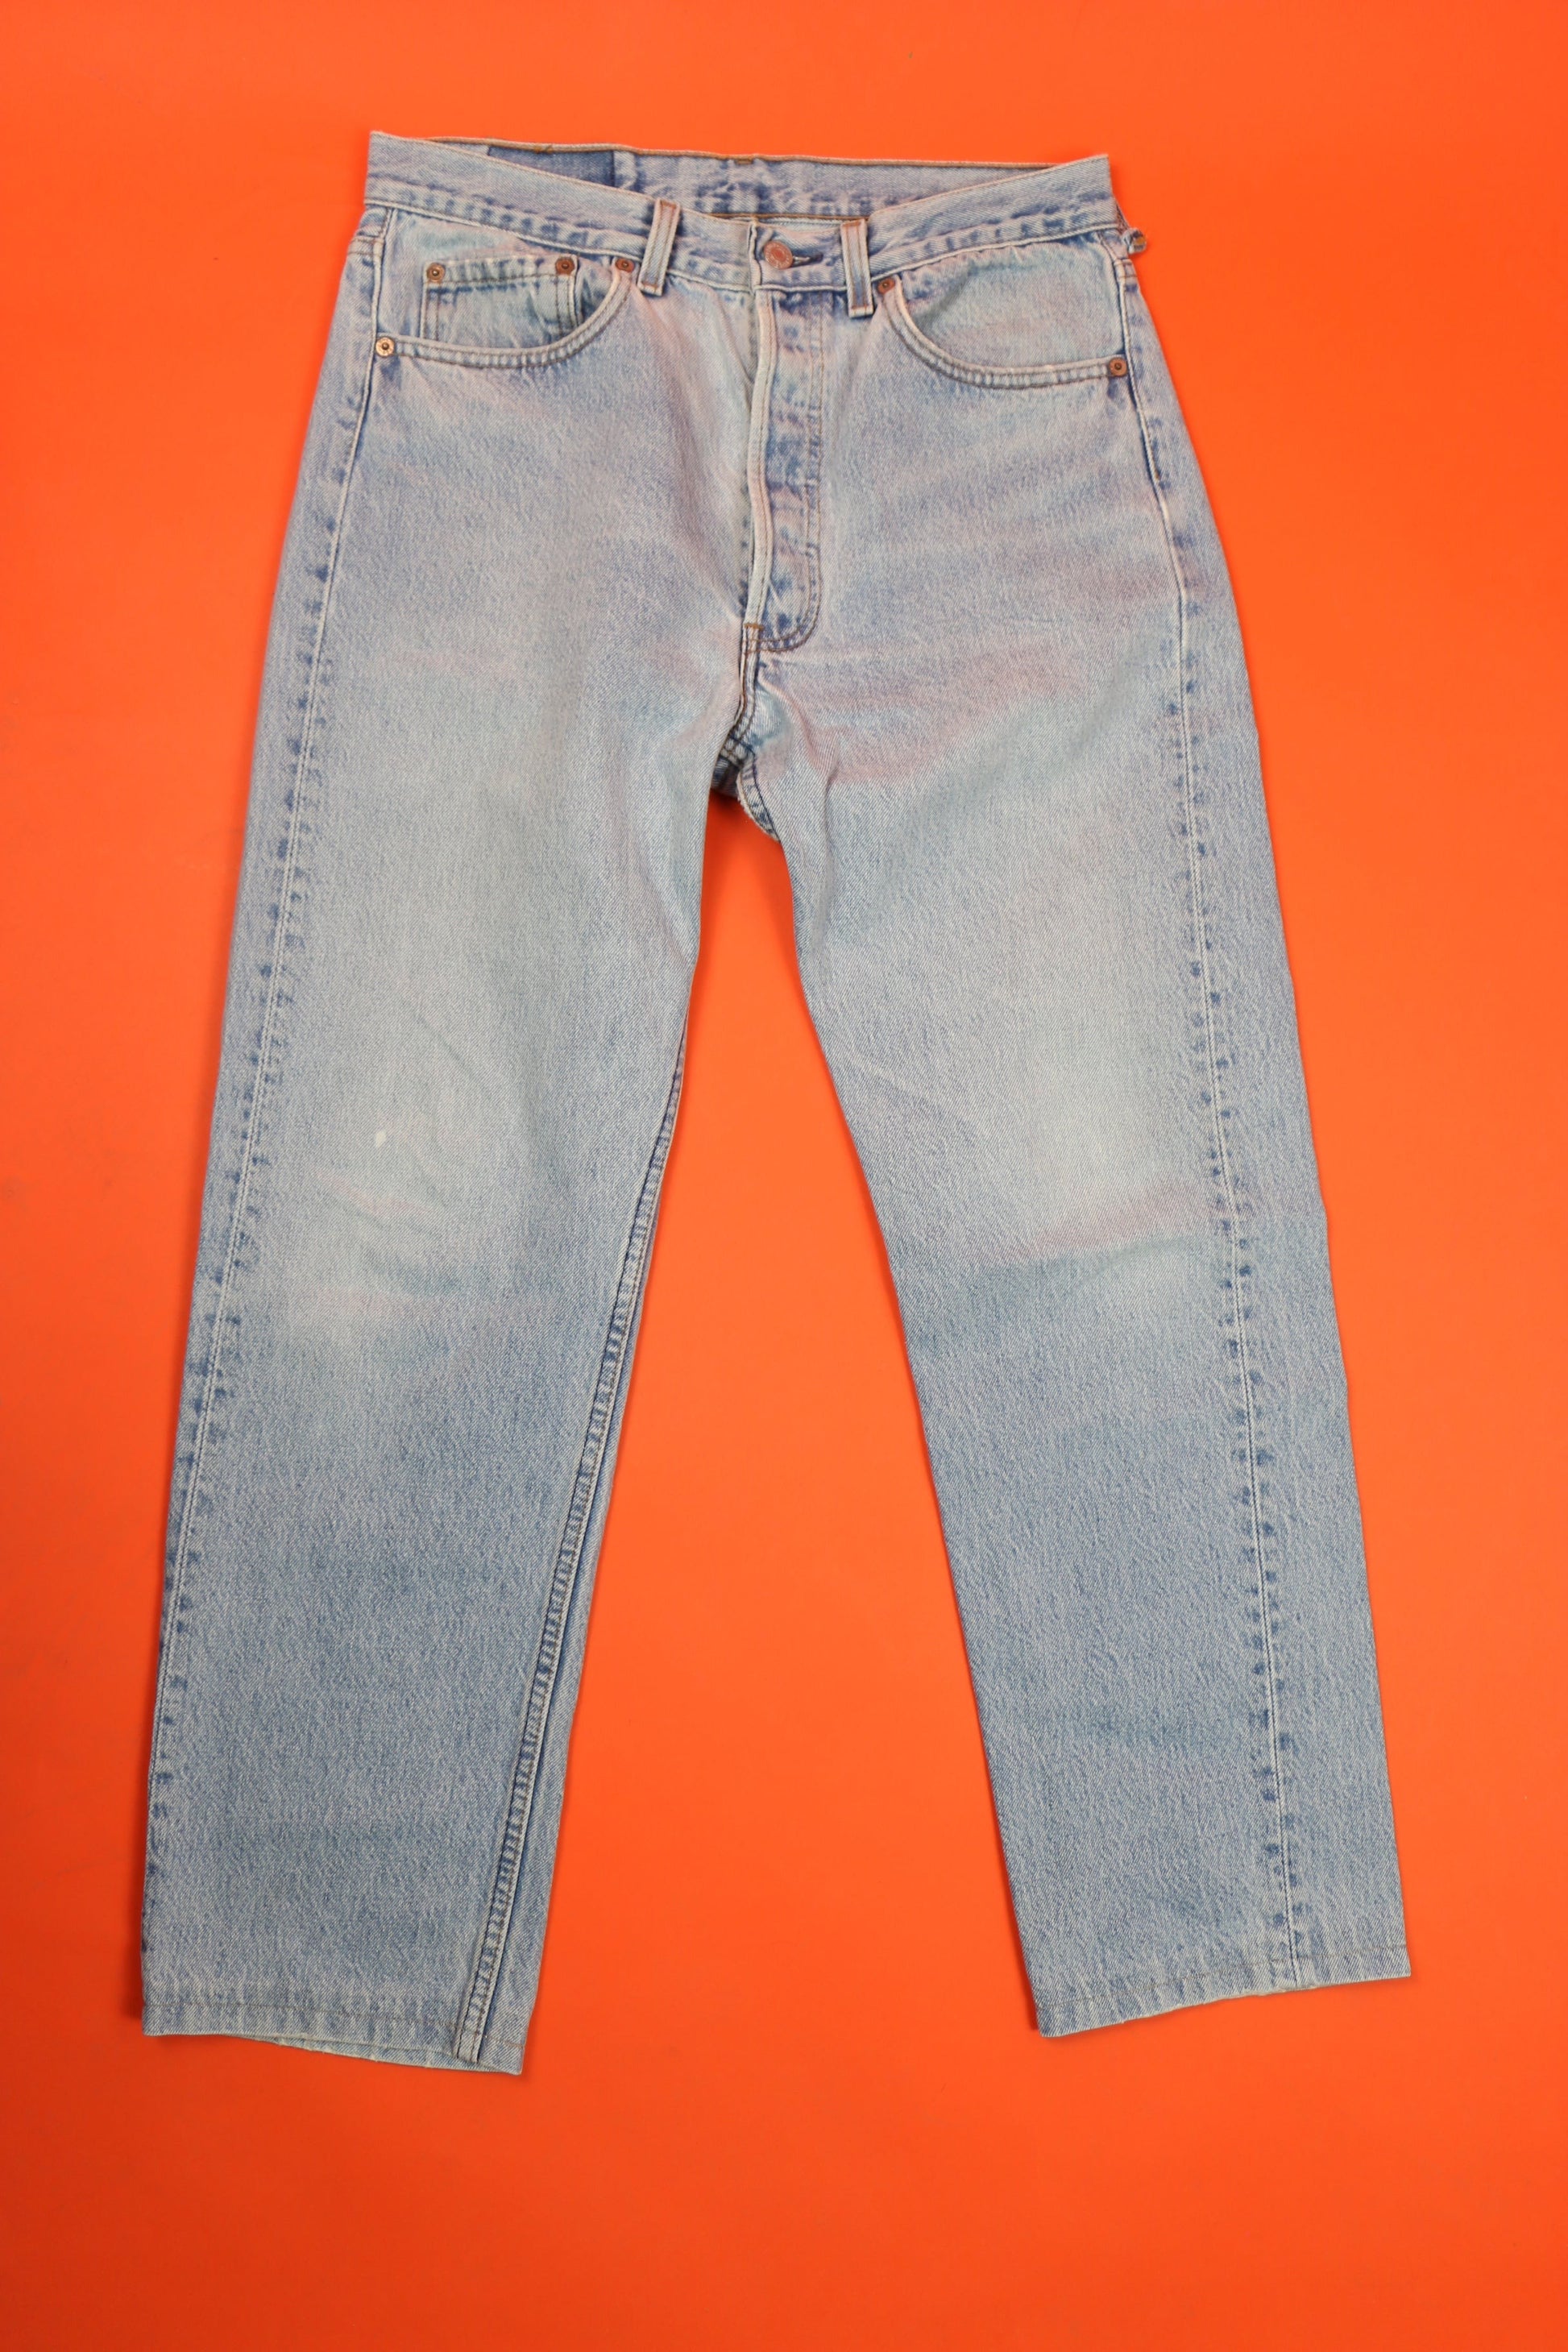 Levi's 501 Jeans Made in U.S.A. 'W34 L33' - vintage clothing clochard92.com